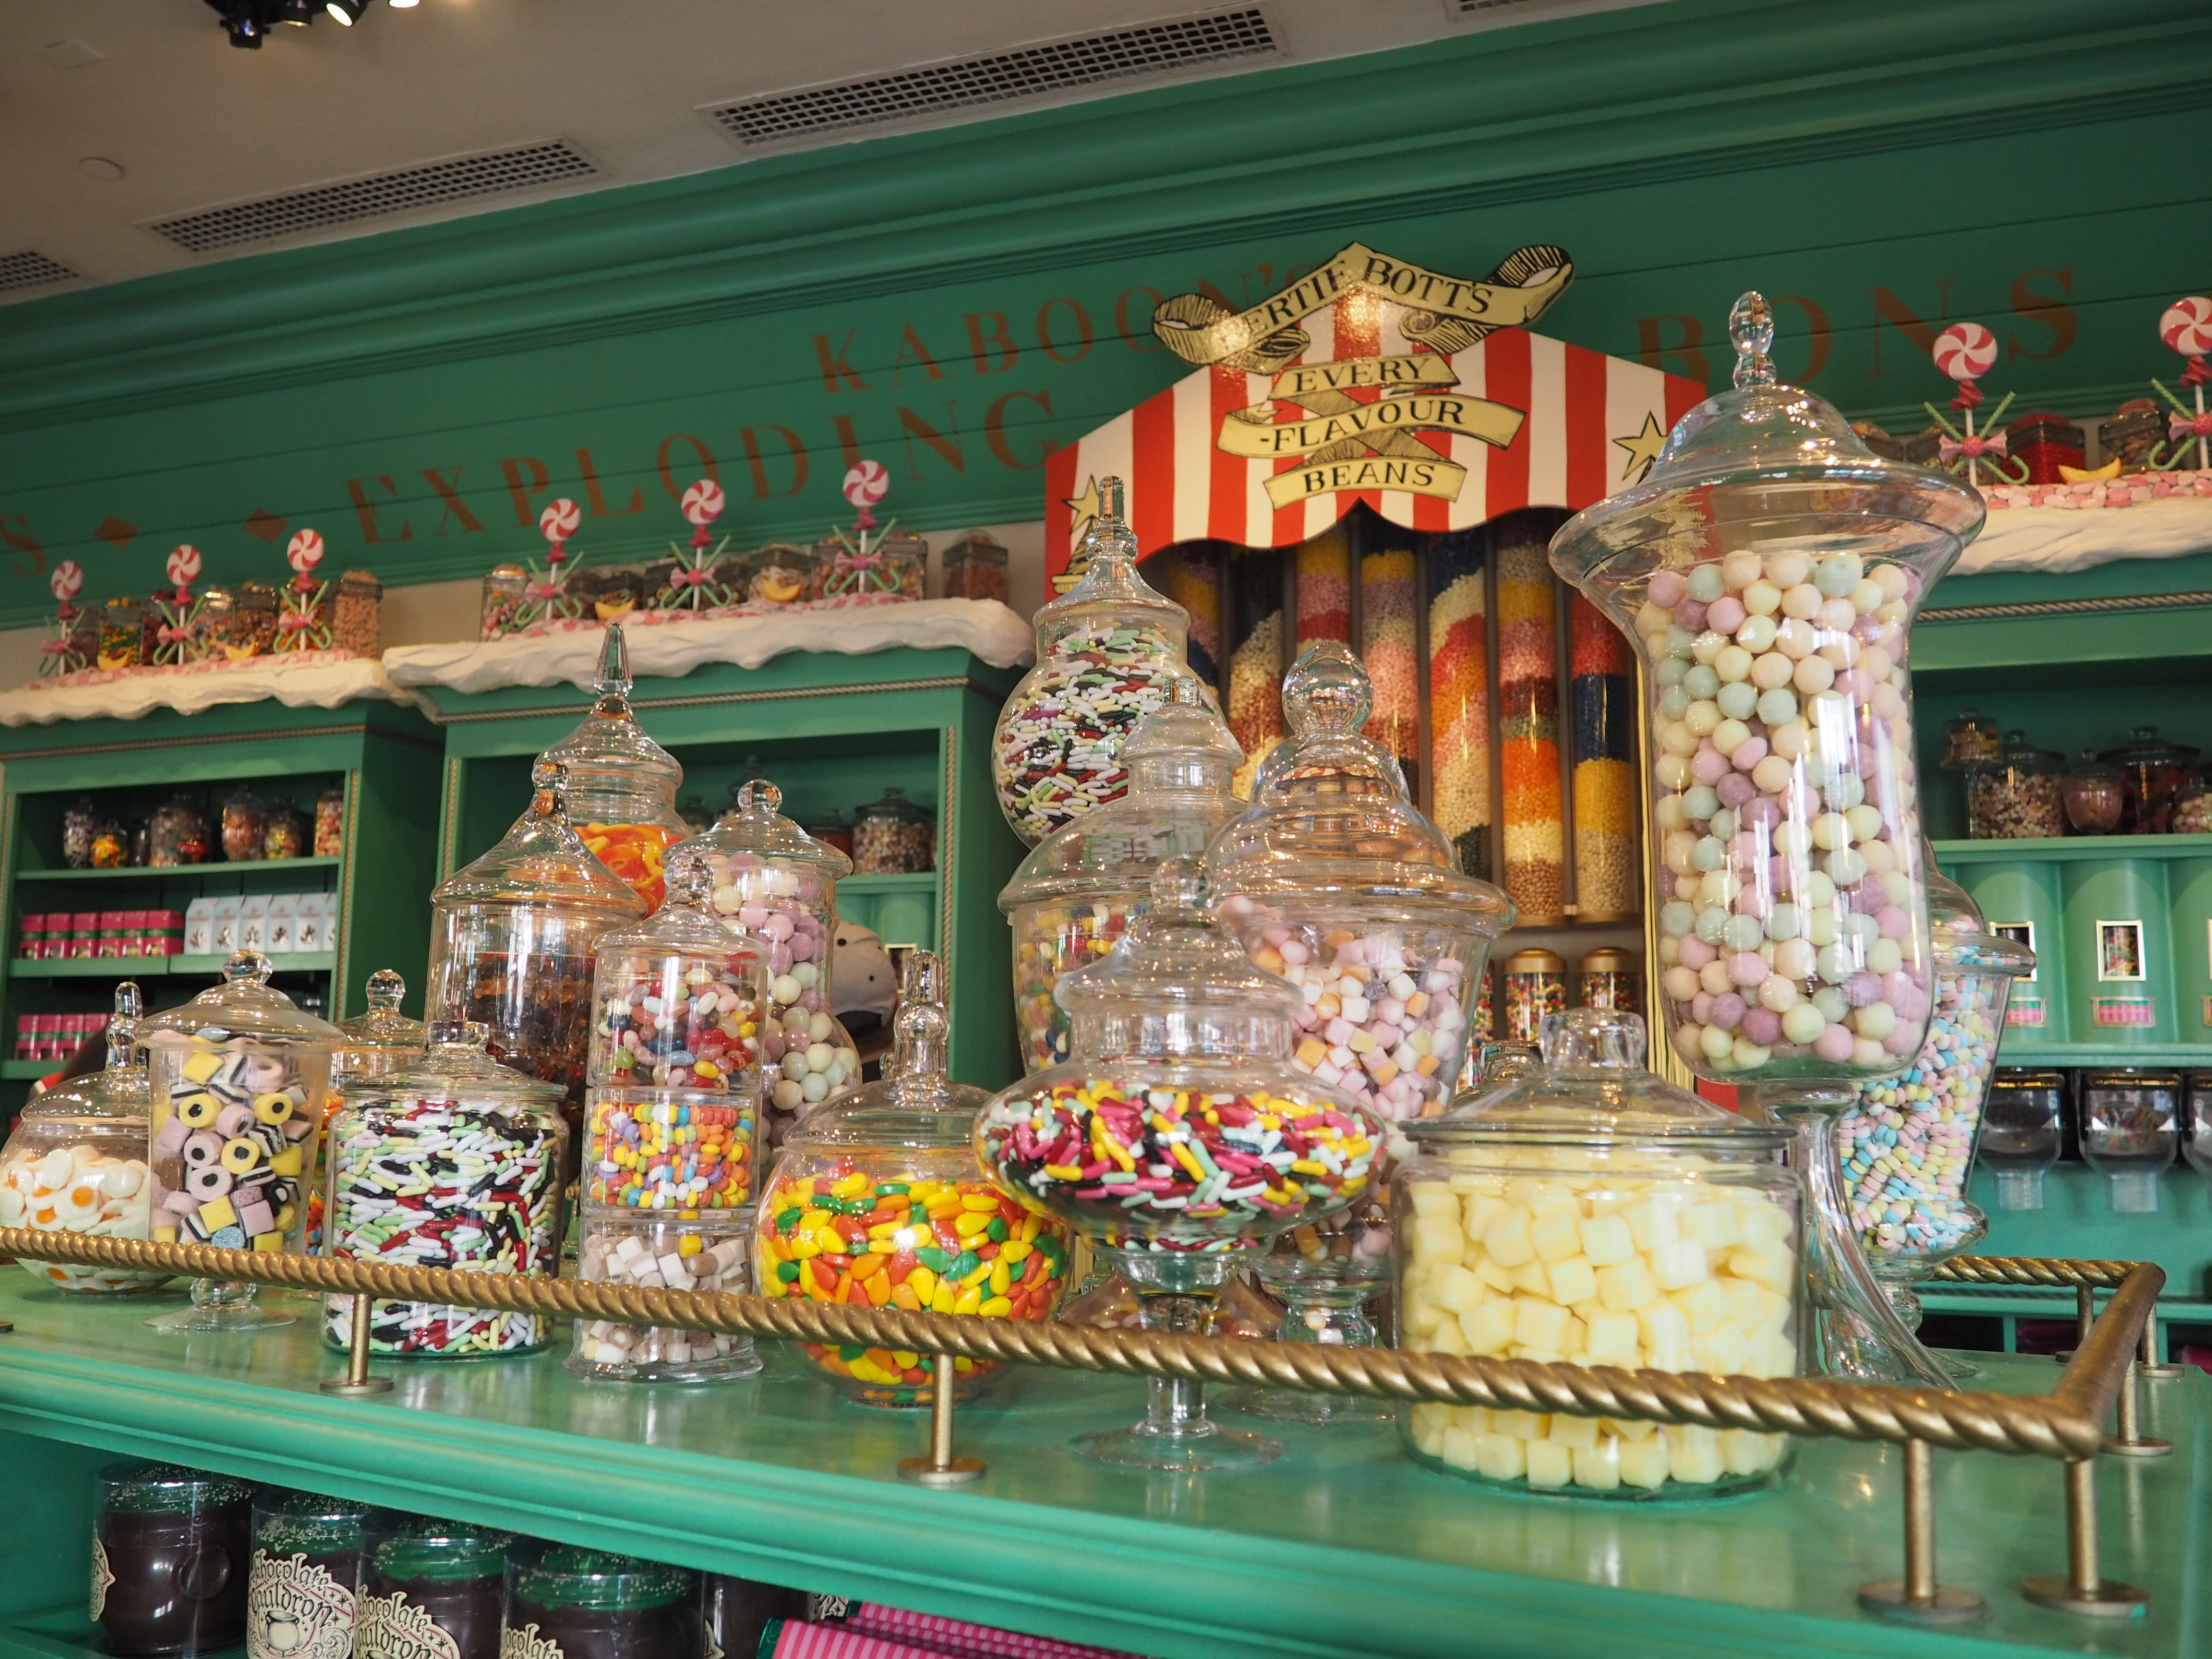 Shop for sweets in Honeydukes following a complete itinerary to Hogsmeade Village